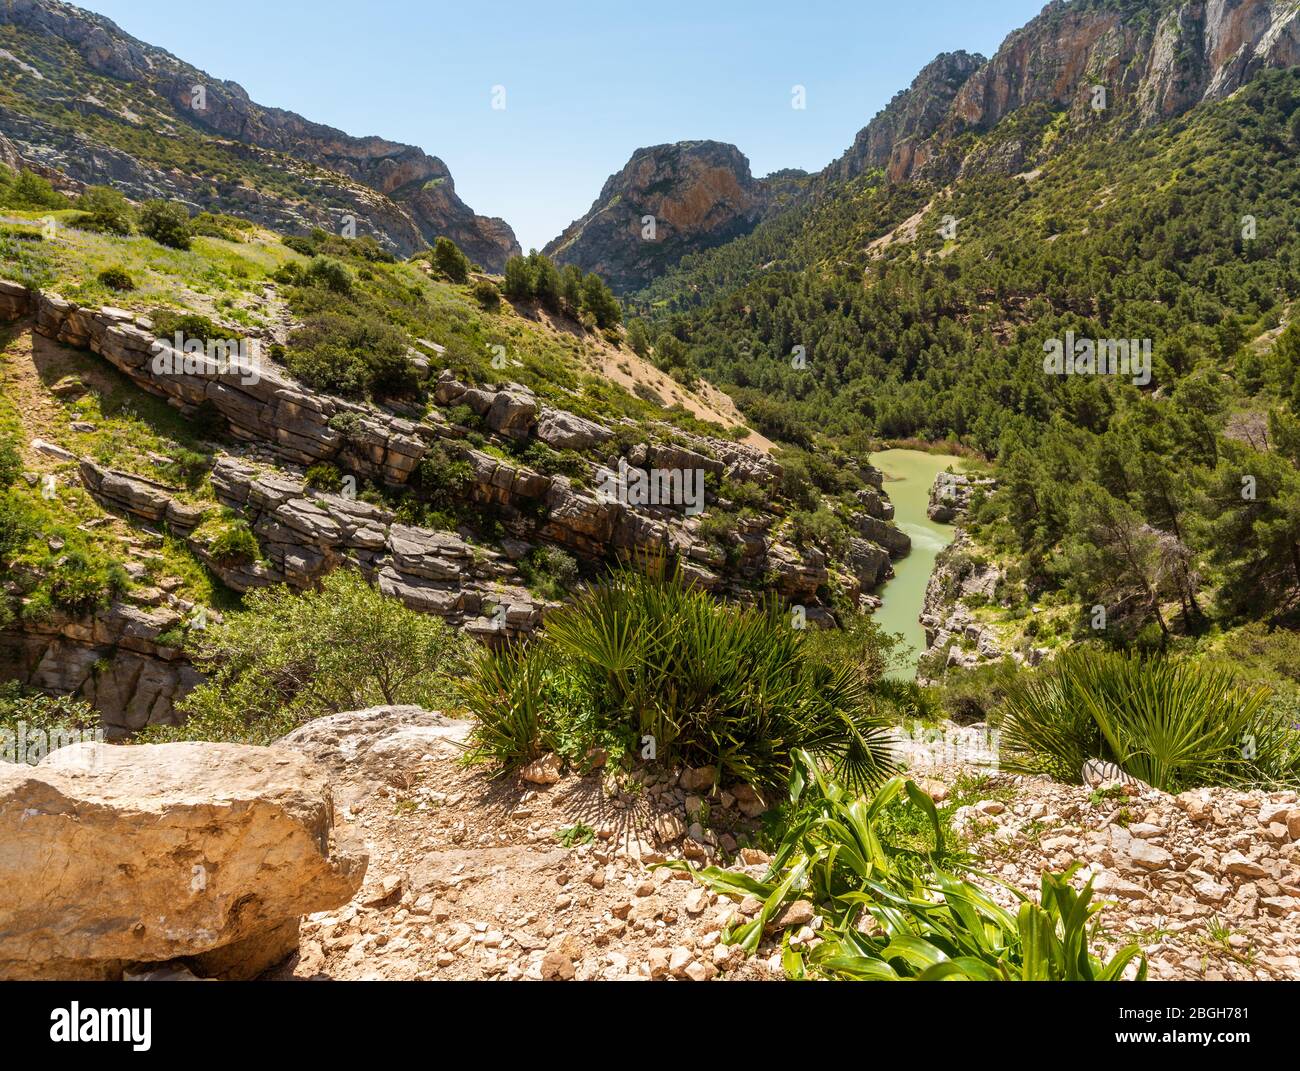 April 17, 2018 - El Chorro, Spain. River Guadalhorce is flowing through the Desfiladero de los Gaitanes Gorge, and next to the famous Caminito del Rey Stock Photo